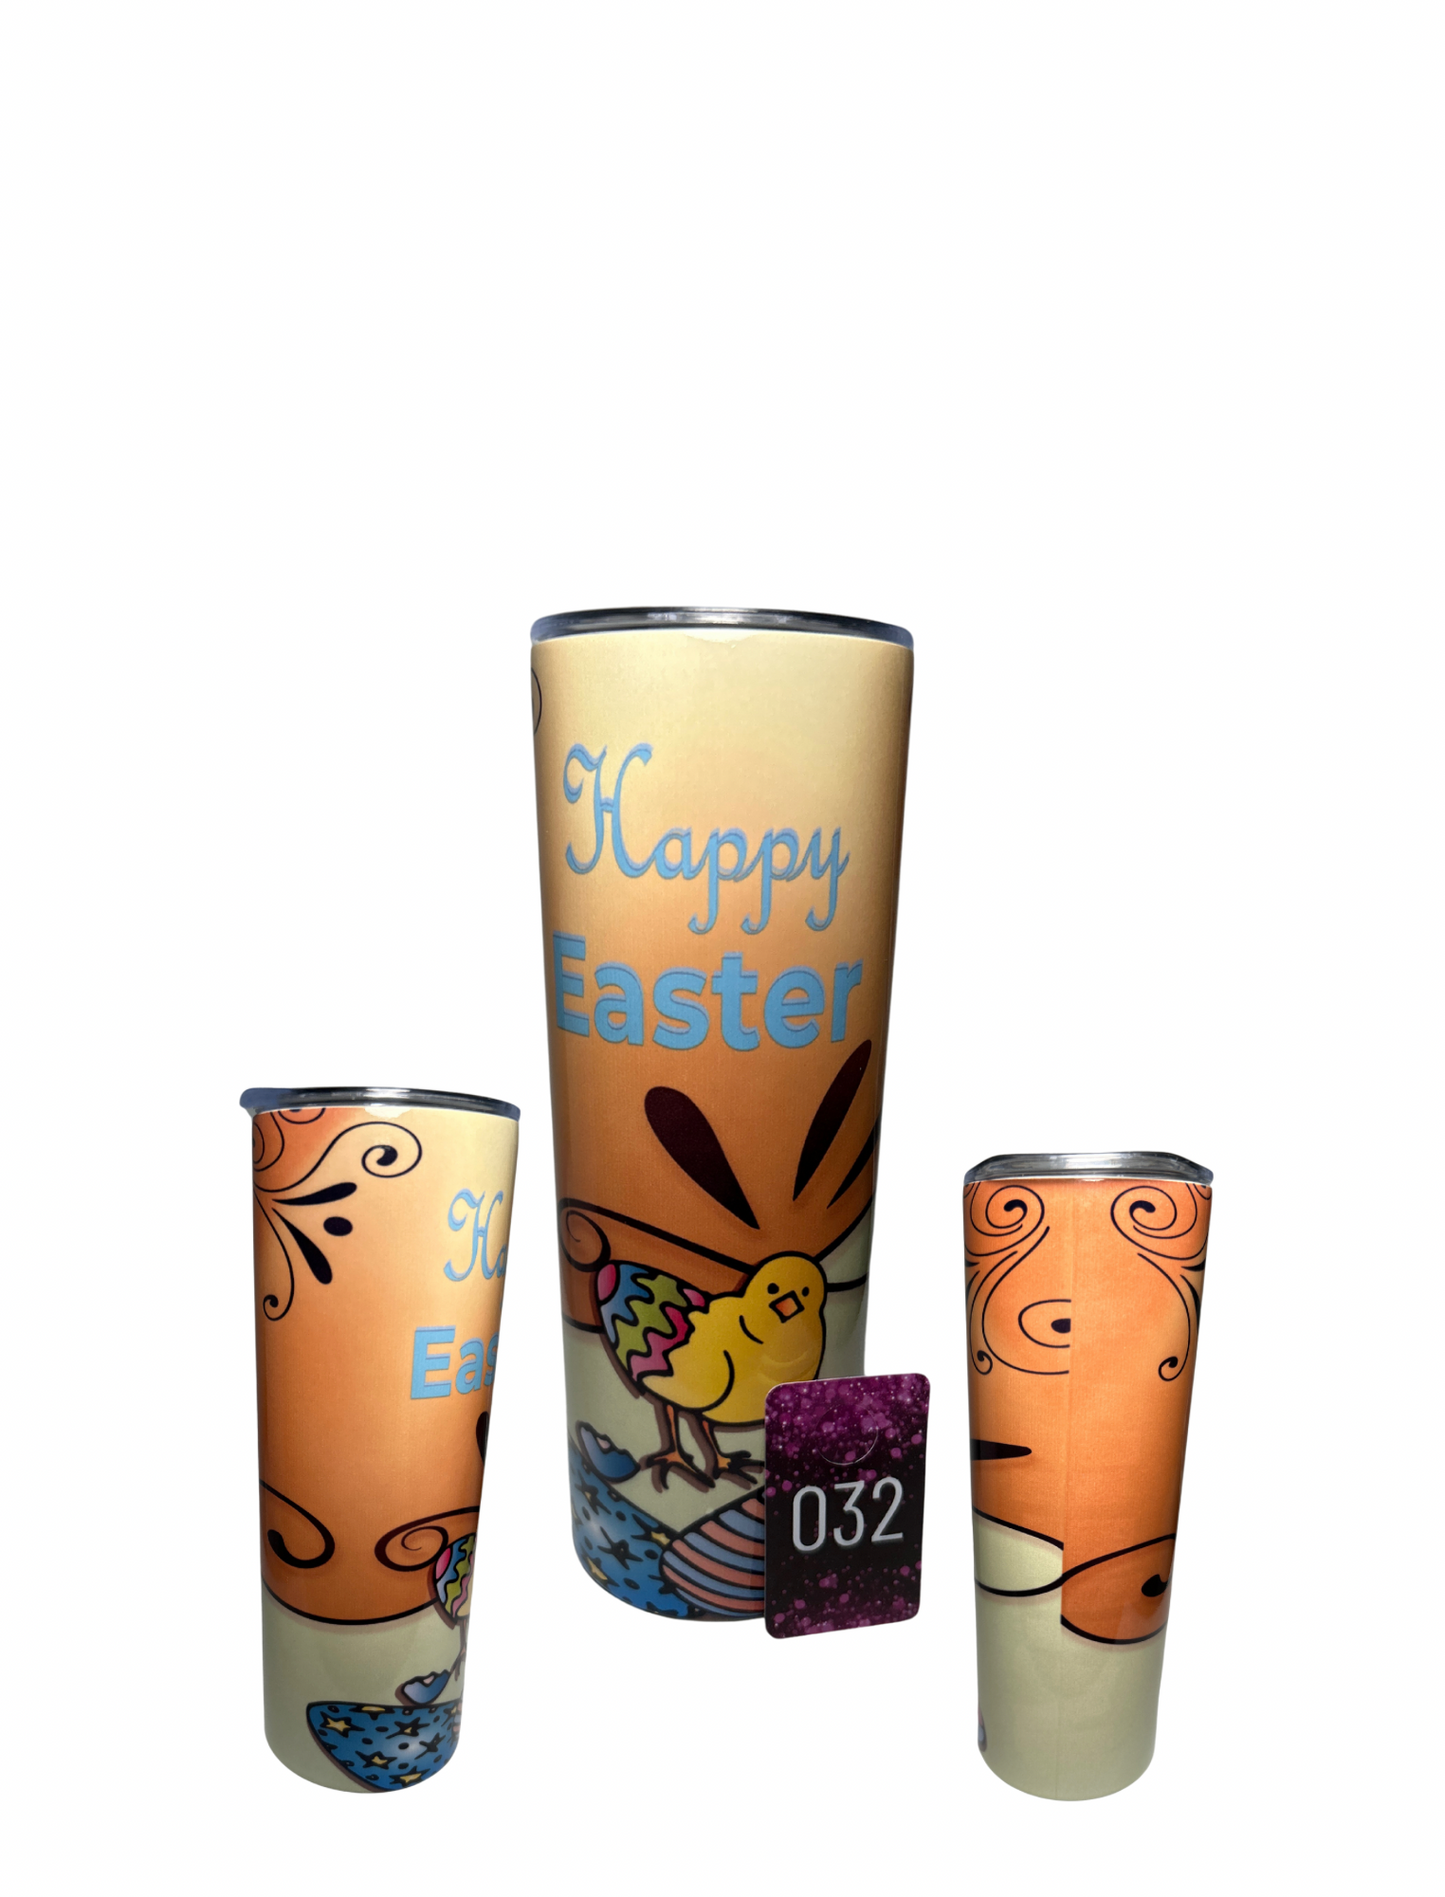 Unbeatable Clearance Price Limited item- Tumblers